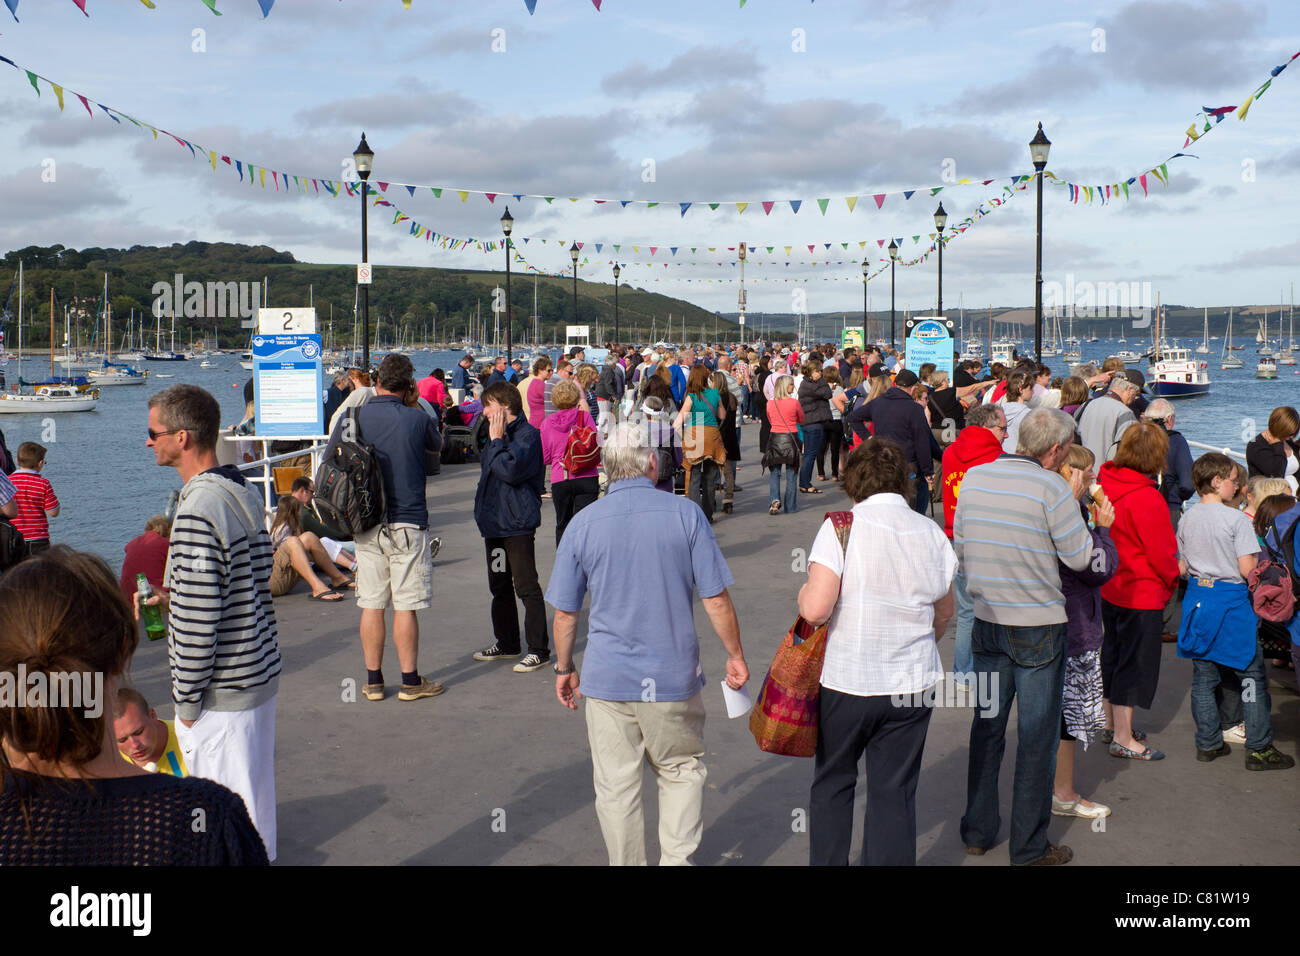 Lots of people gathering on Prince Of Wales Pier in Falmouth to watch the Red Arrows aerobatic display.. Stock Photo